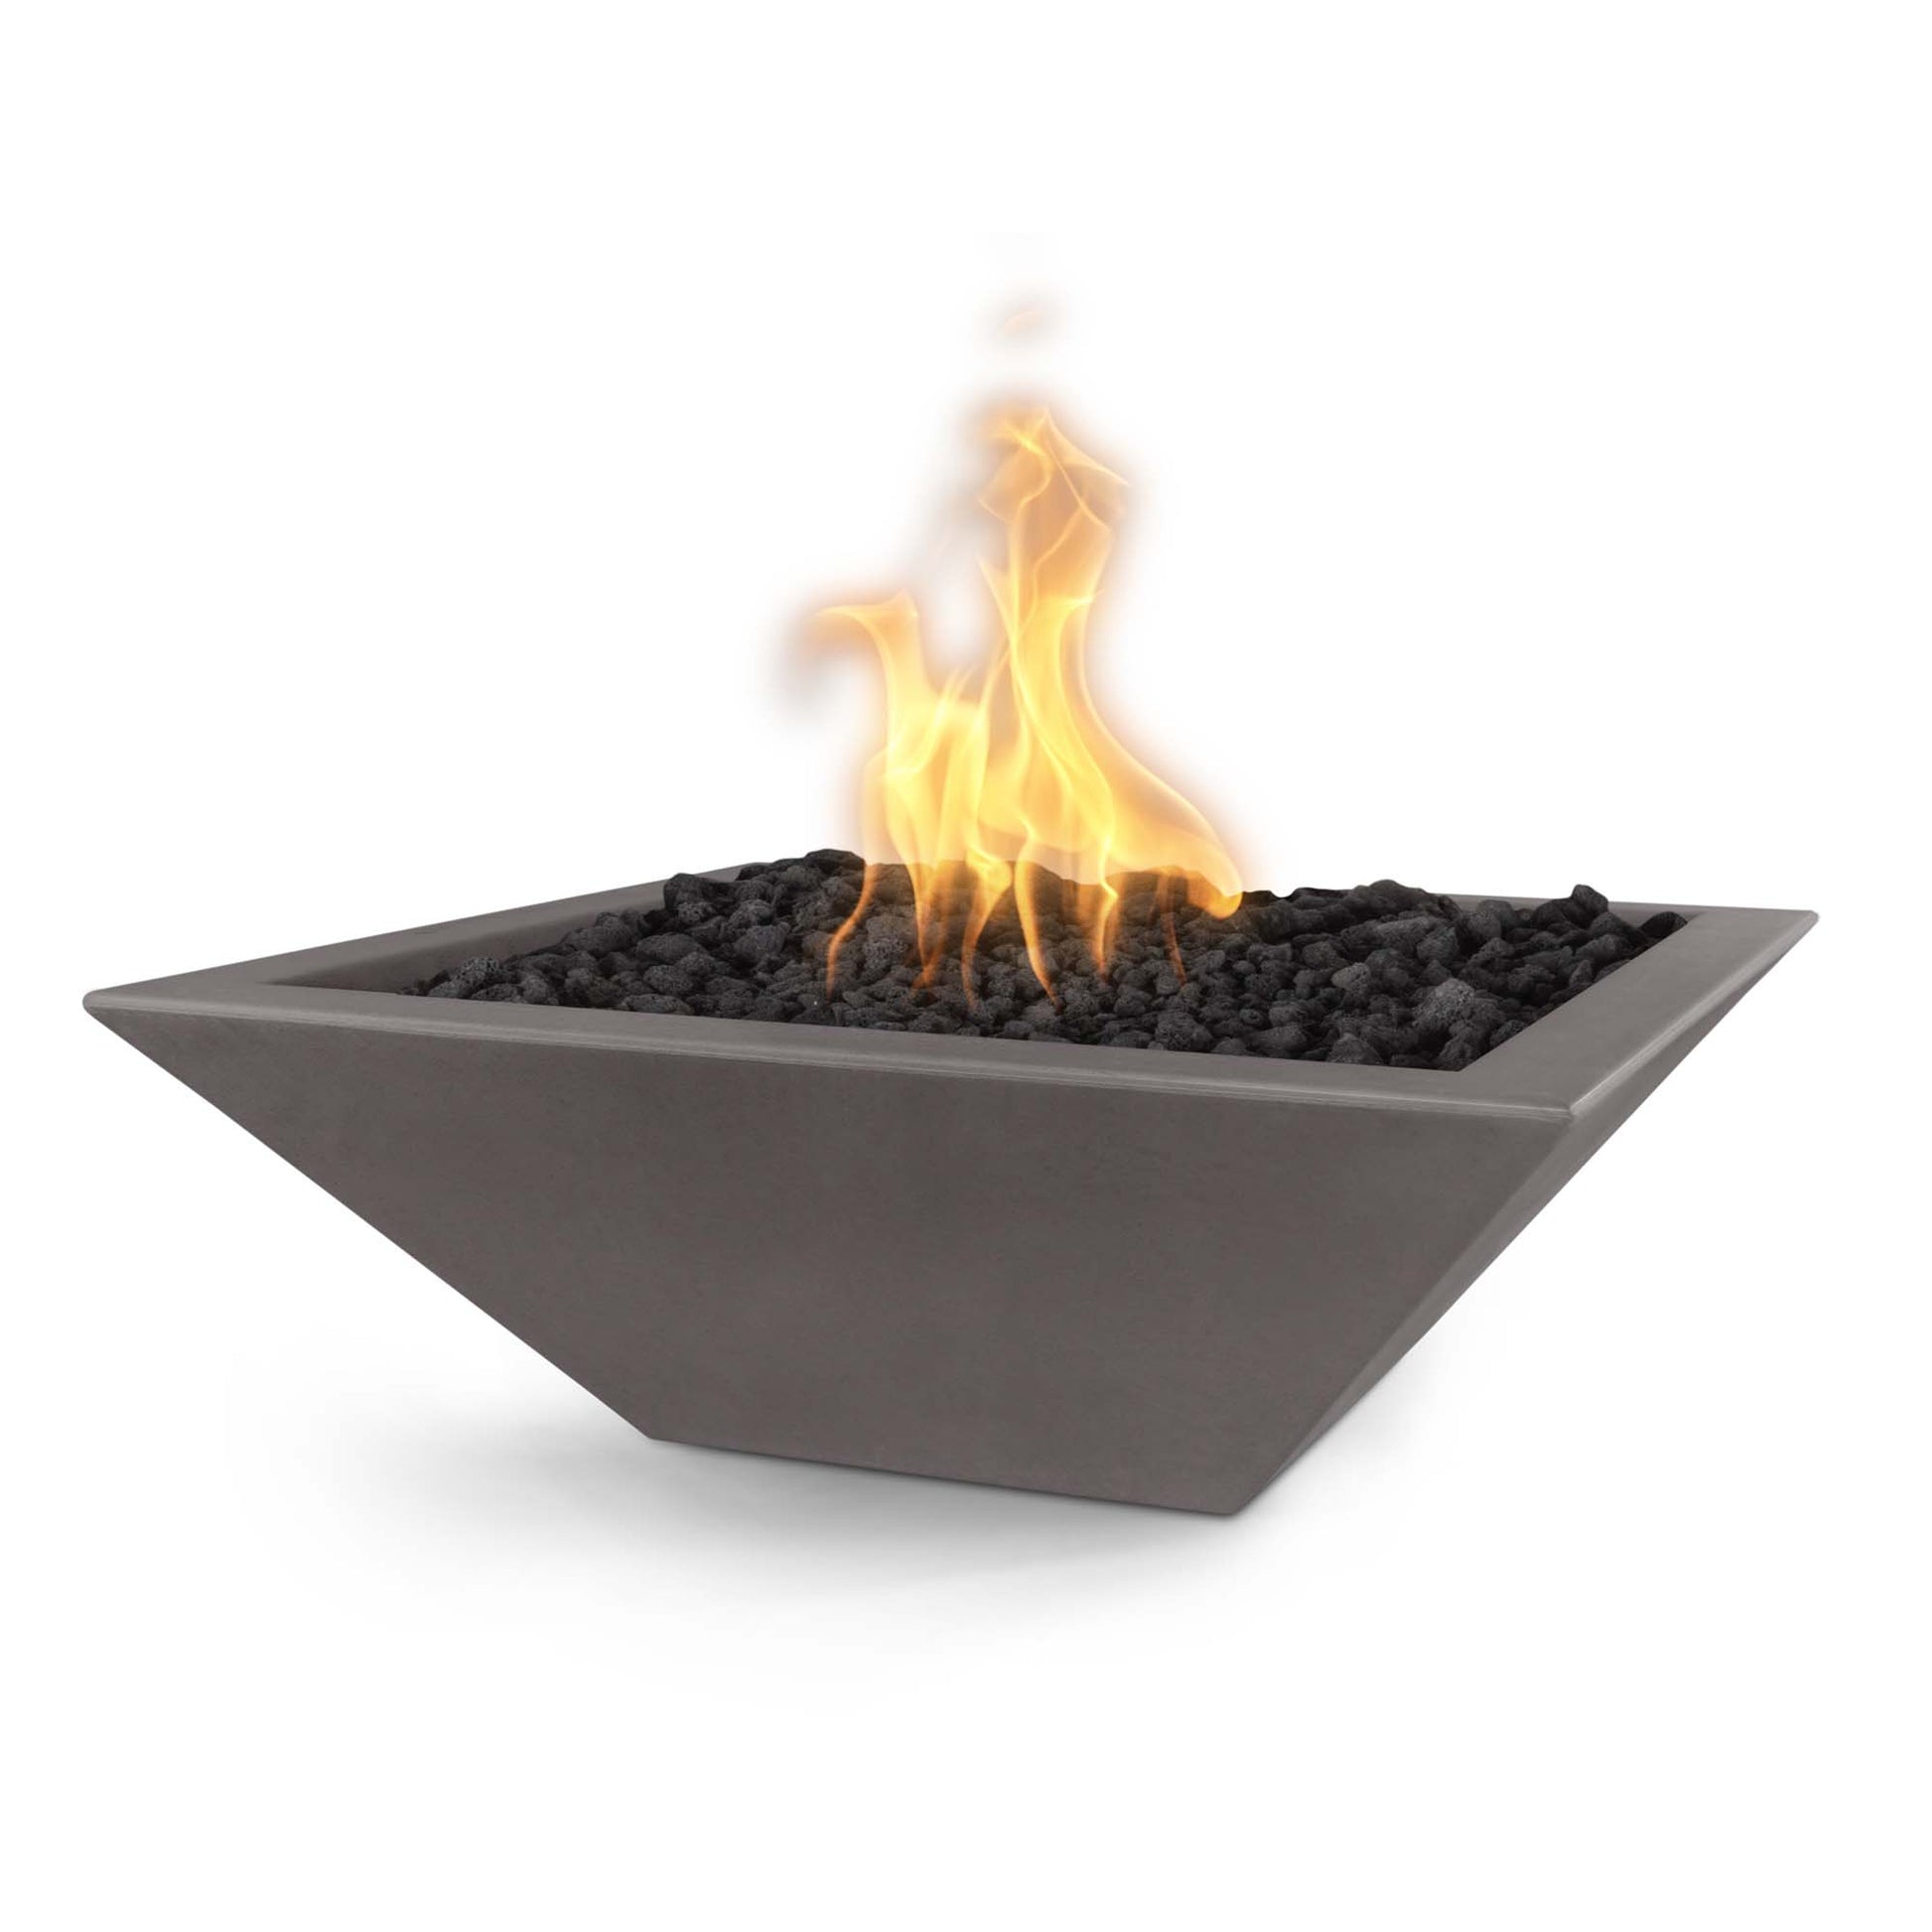 The Outdoor Plus Square Maya 36" Brown GFRC Concrete Liquid Propane Fire Bowl with Match Lit with Flame Sense Ignition